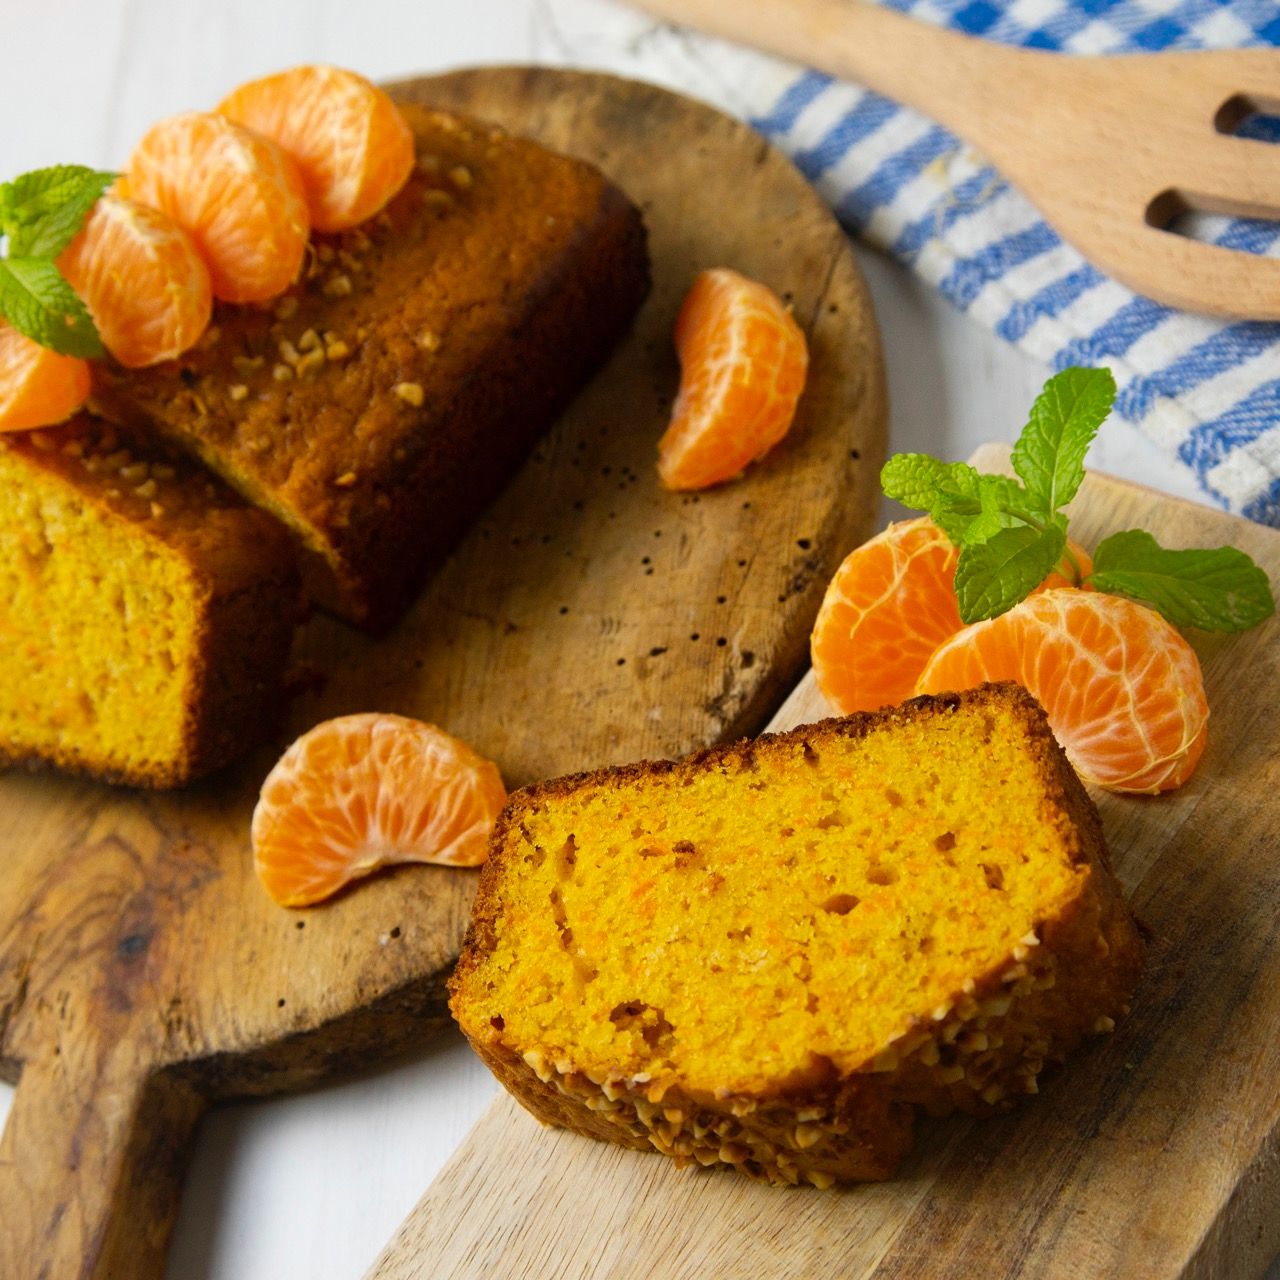 Delicious-vegan-carrot-and-tangerine-sponge-cake-with-ground-almonds.-1341791821_6000x4000_square_Large.jpeg